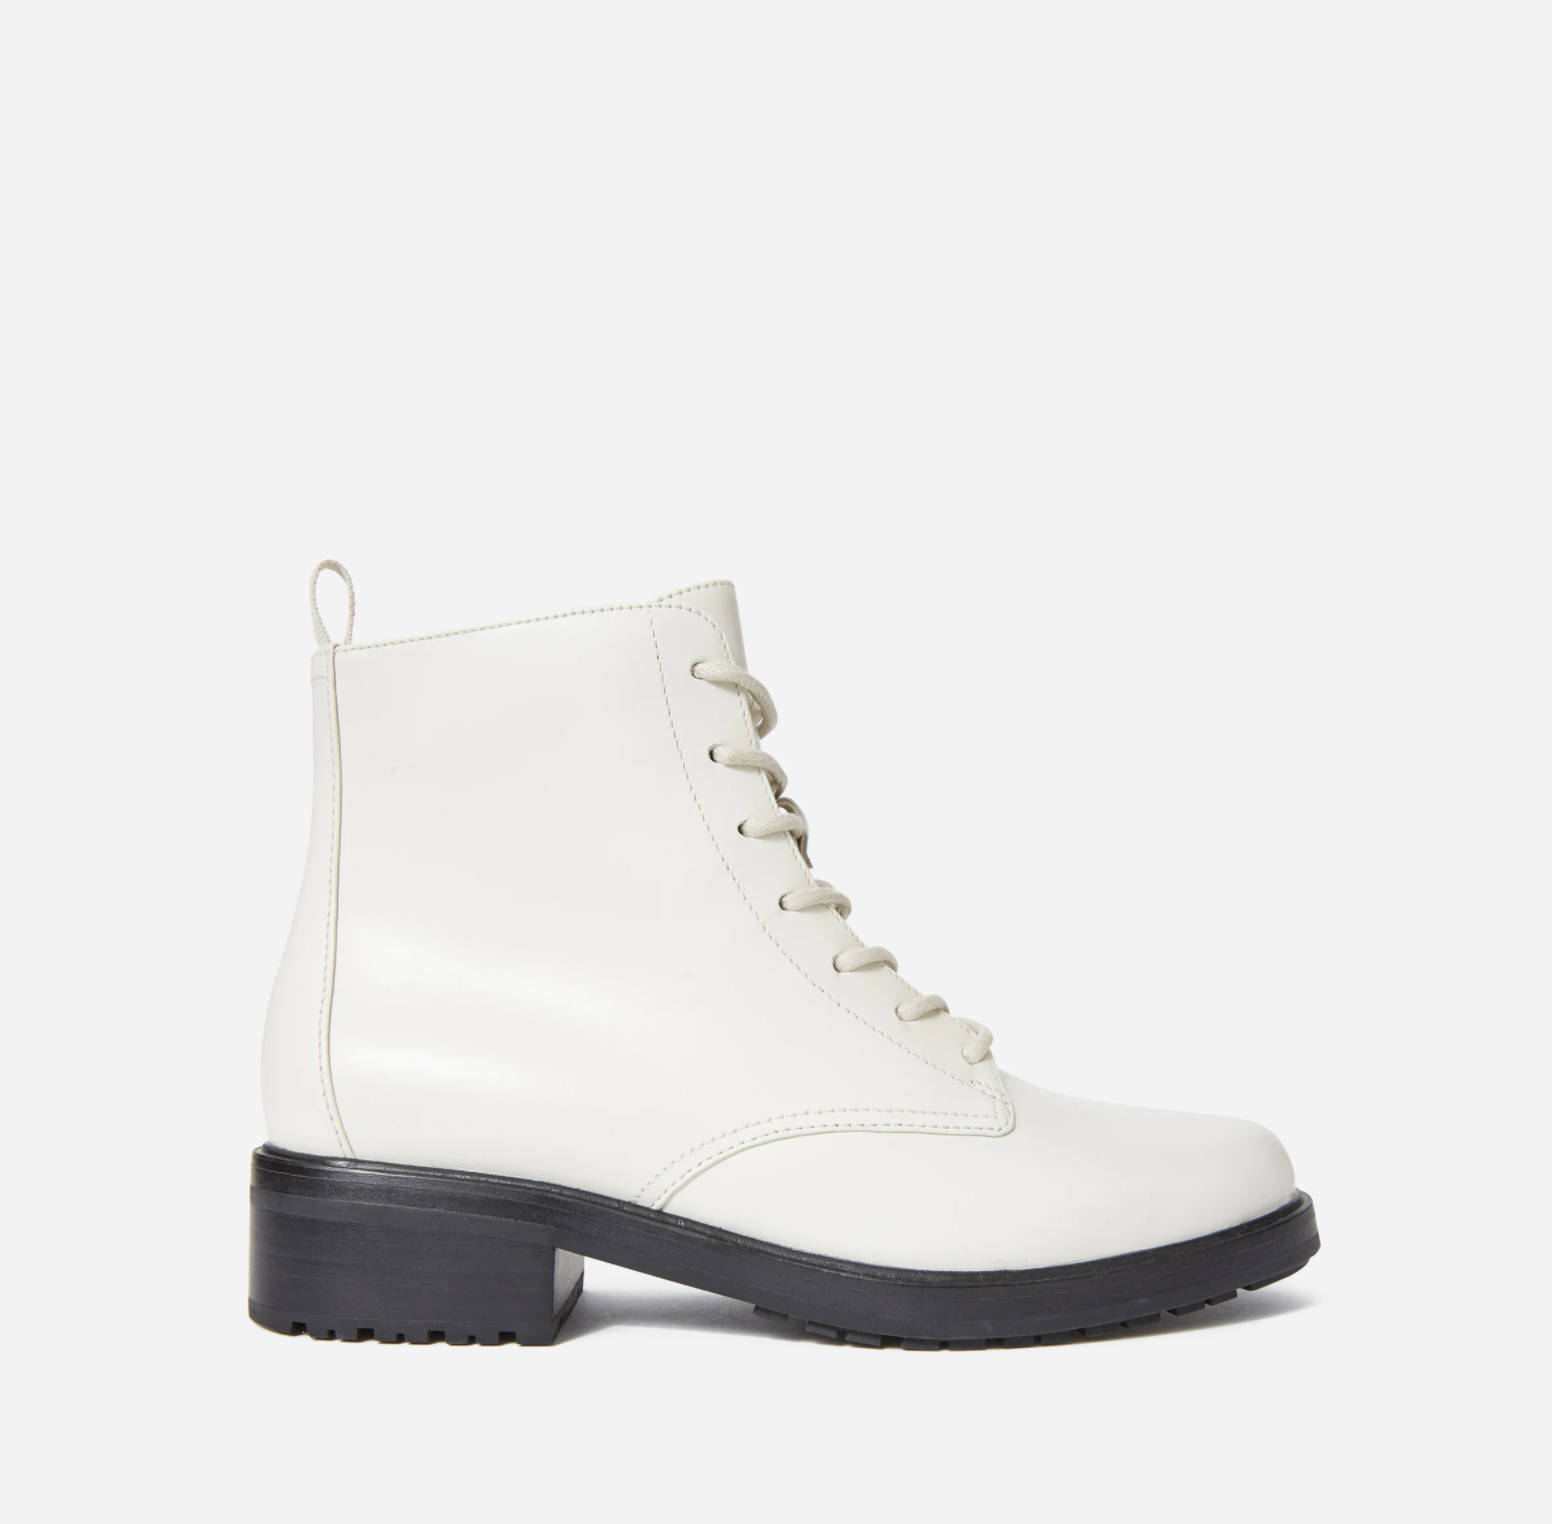 Everlane The Modern Utility Lace-Up Boot